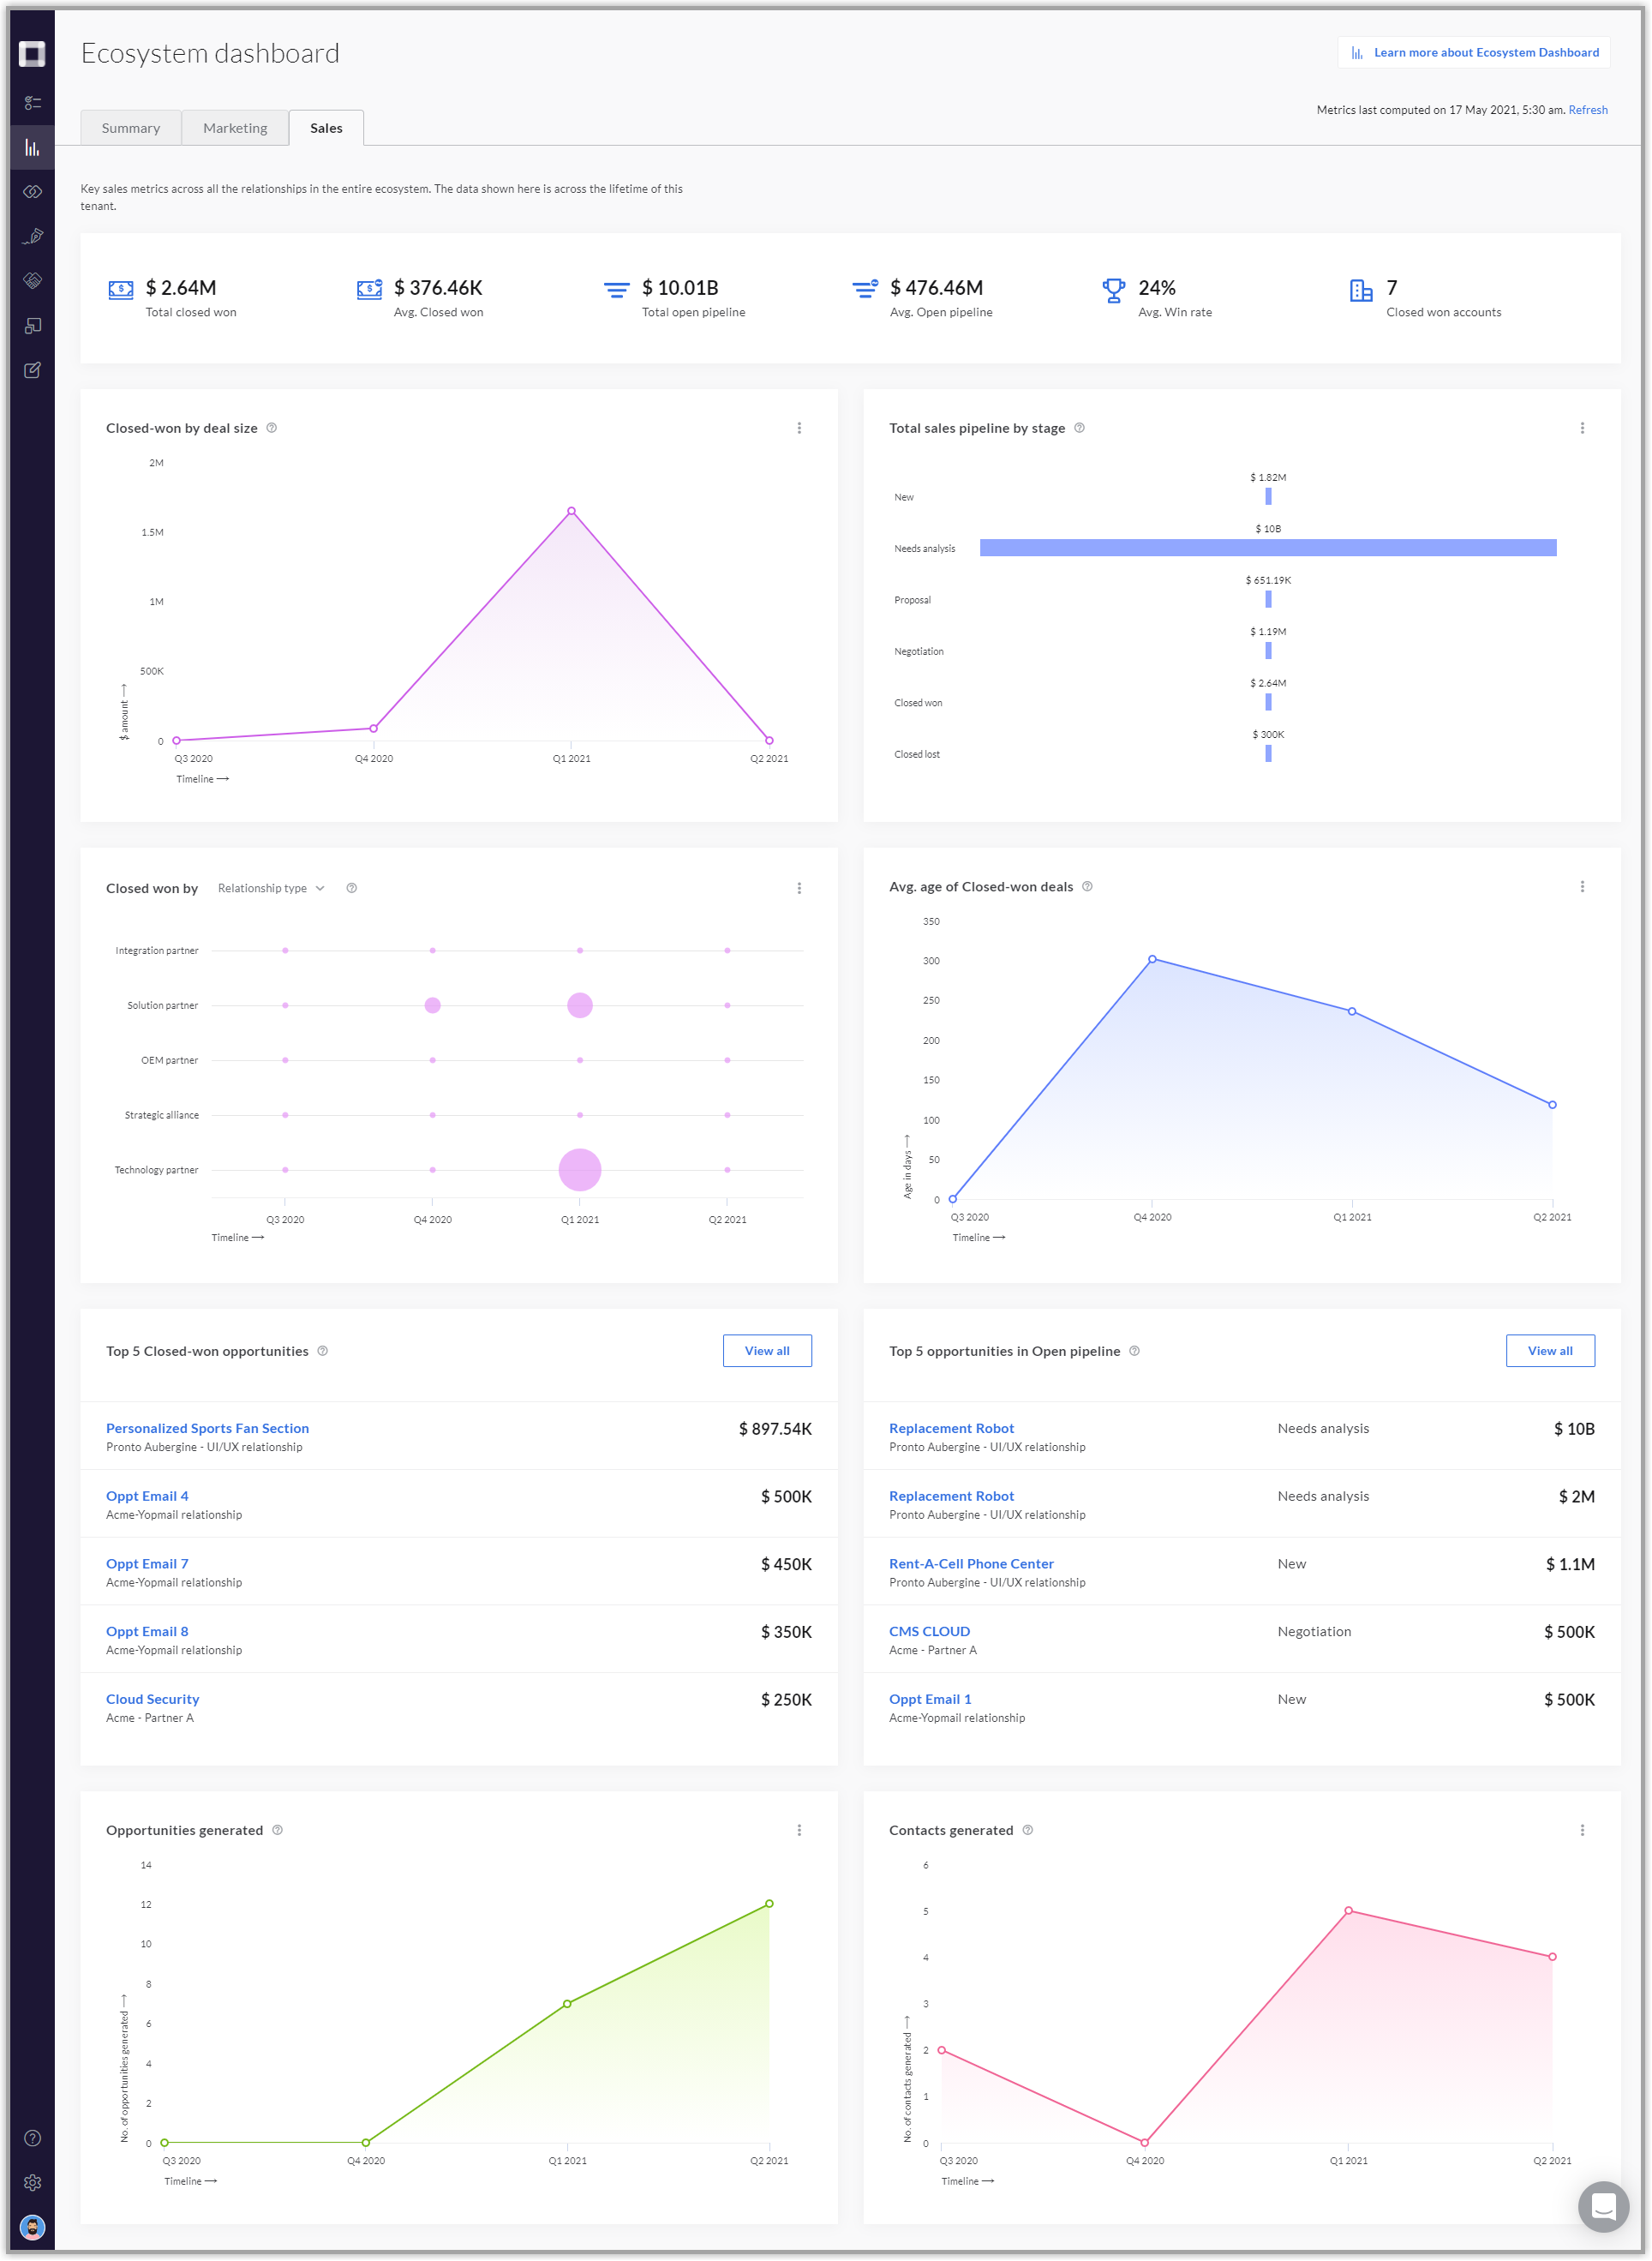 23._Sales_tab_-_Ecosystem_Dashboard.png